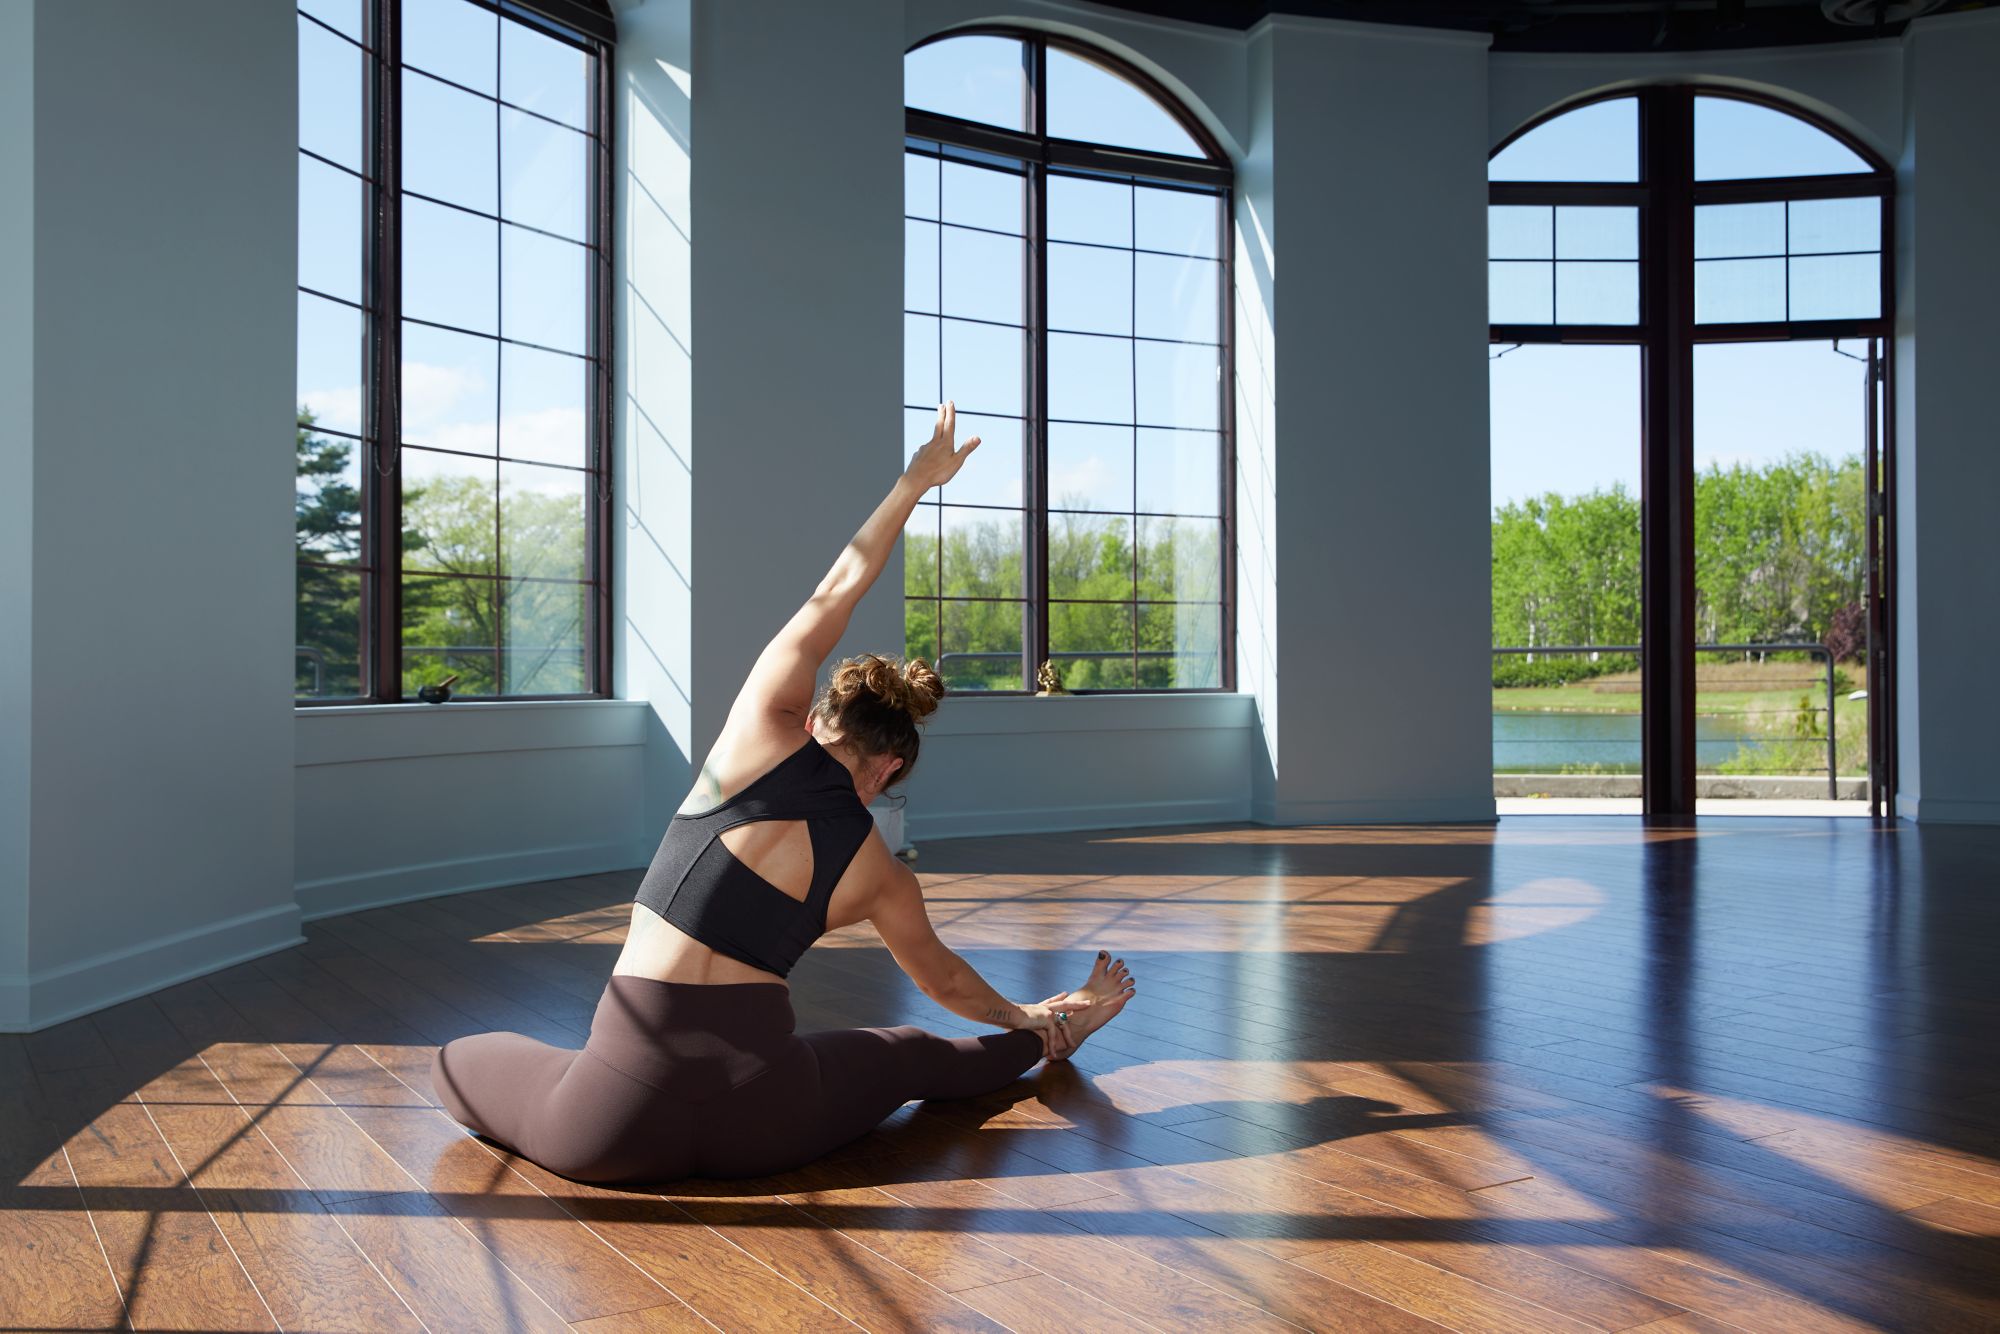 a woman sitting on the ground doing yoga with windows in the background